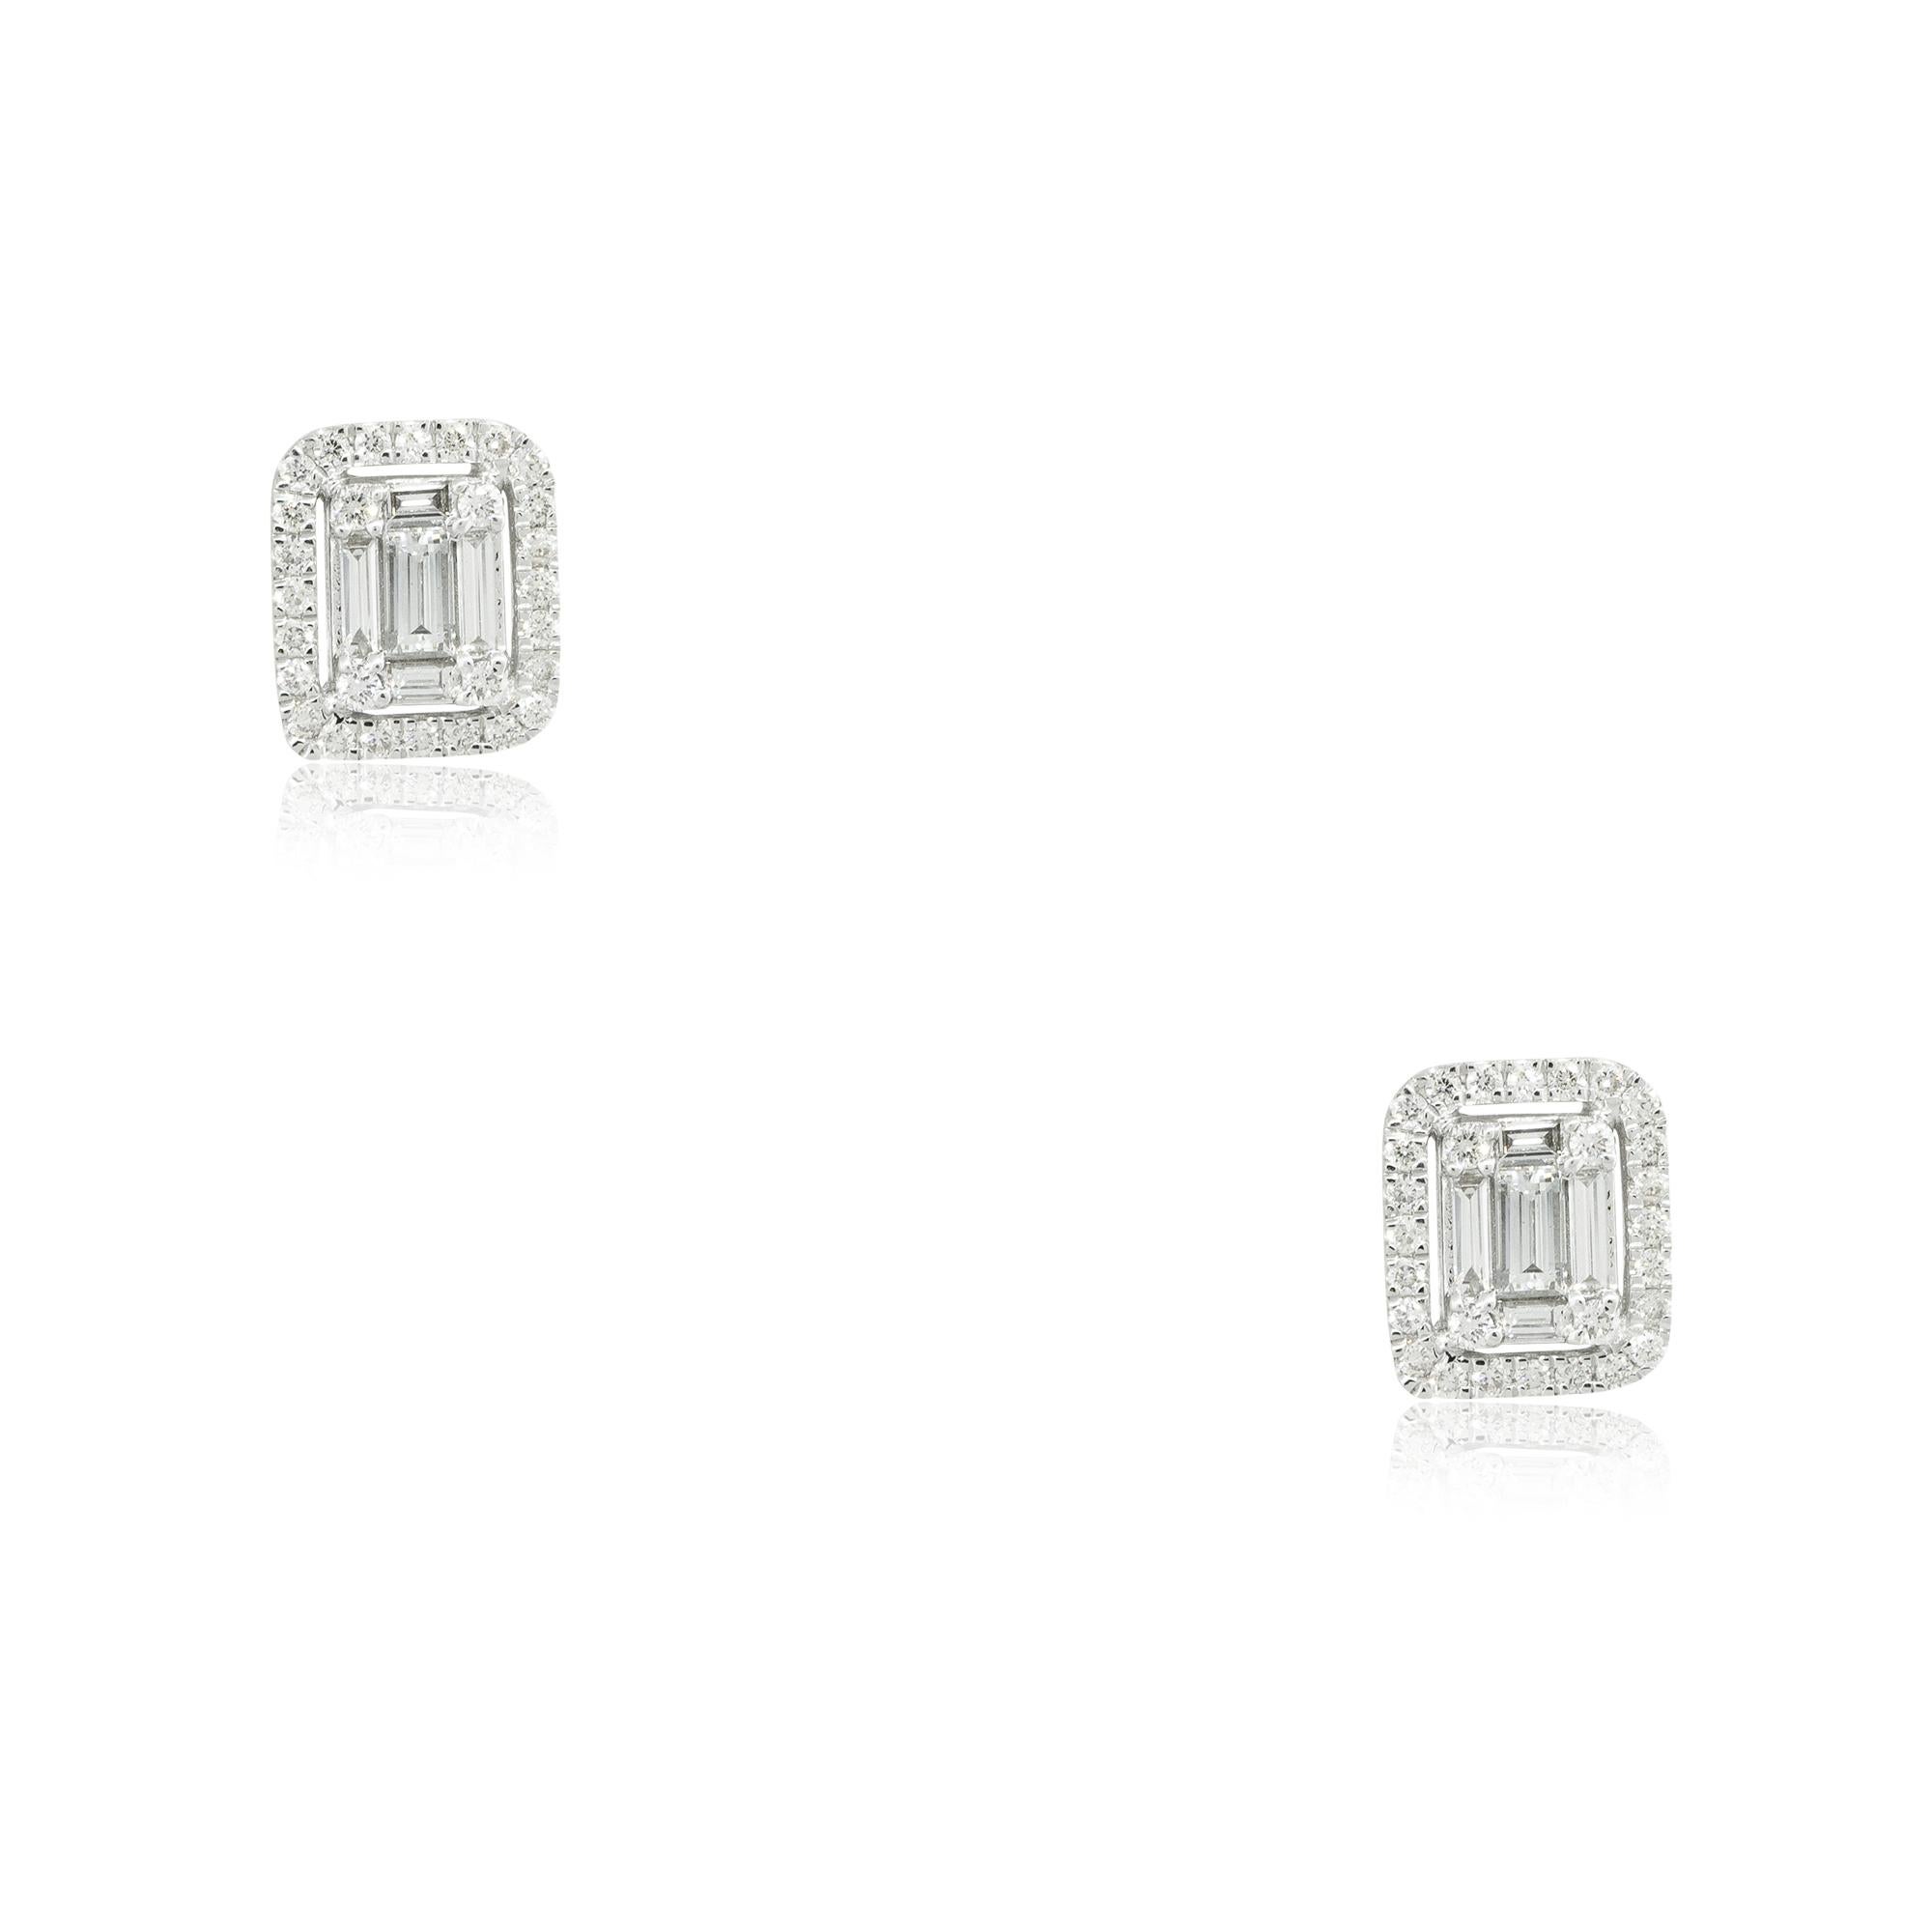 14k White Gold 0.7ctw Emerald Cut Diamond Rectangular Shape Earrings
Material: 14k White Gold
Diamond Details: Diamonds are approximately 0.70ctw of Emerald, Baguette, and Round Brilliant cut Diamonds. There are 2 larger Emerald cut diamonds in each